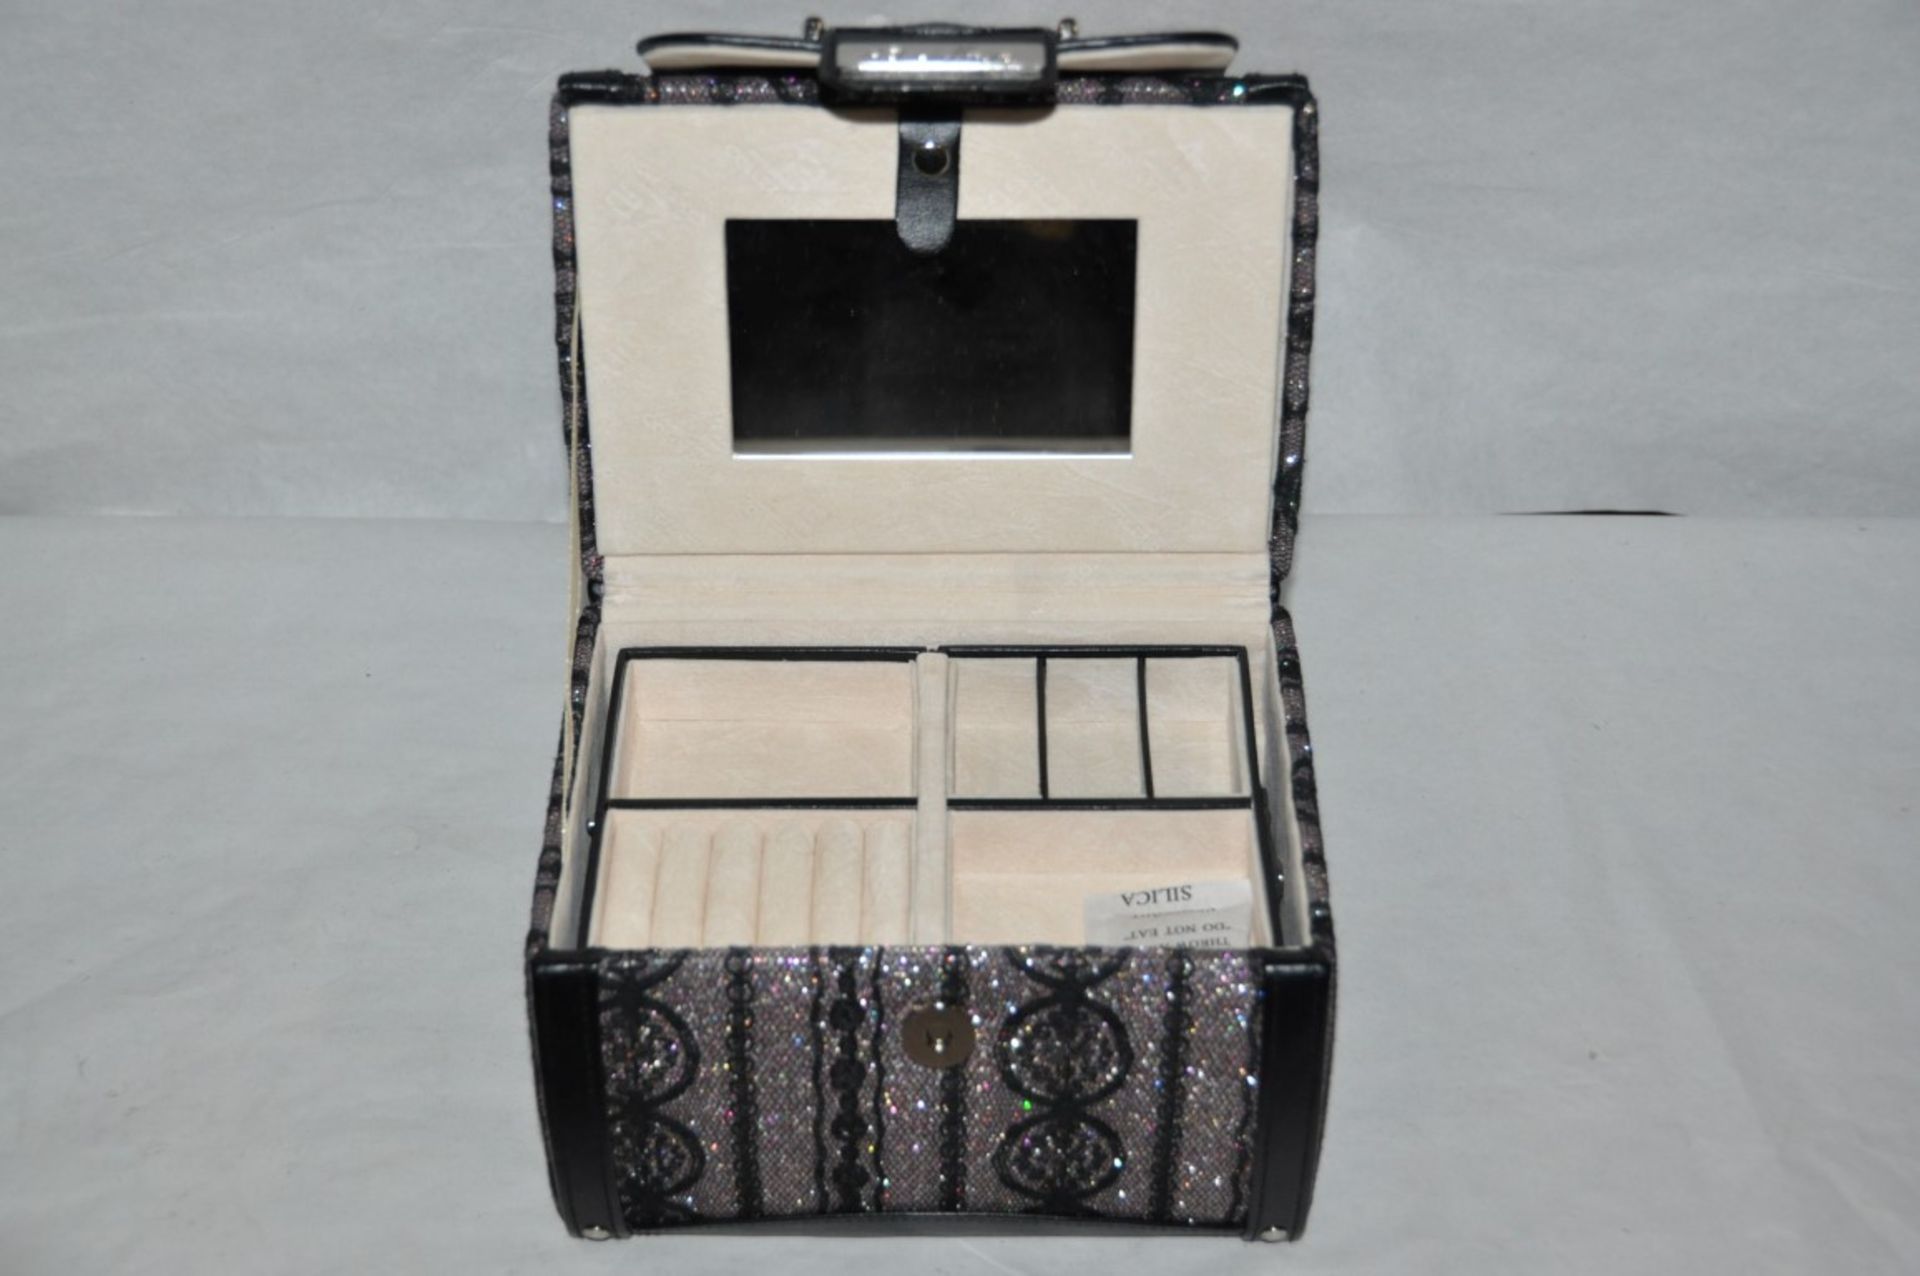 1 x "AB Collezioni" Italian Luxury Jewellery Case (31482N) - Ref LT113 – Features Top & Bottom - Image 4 of 5